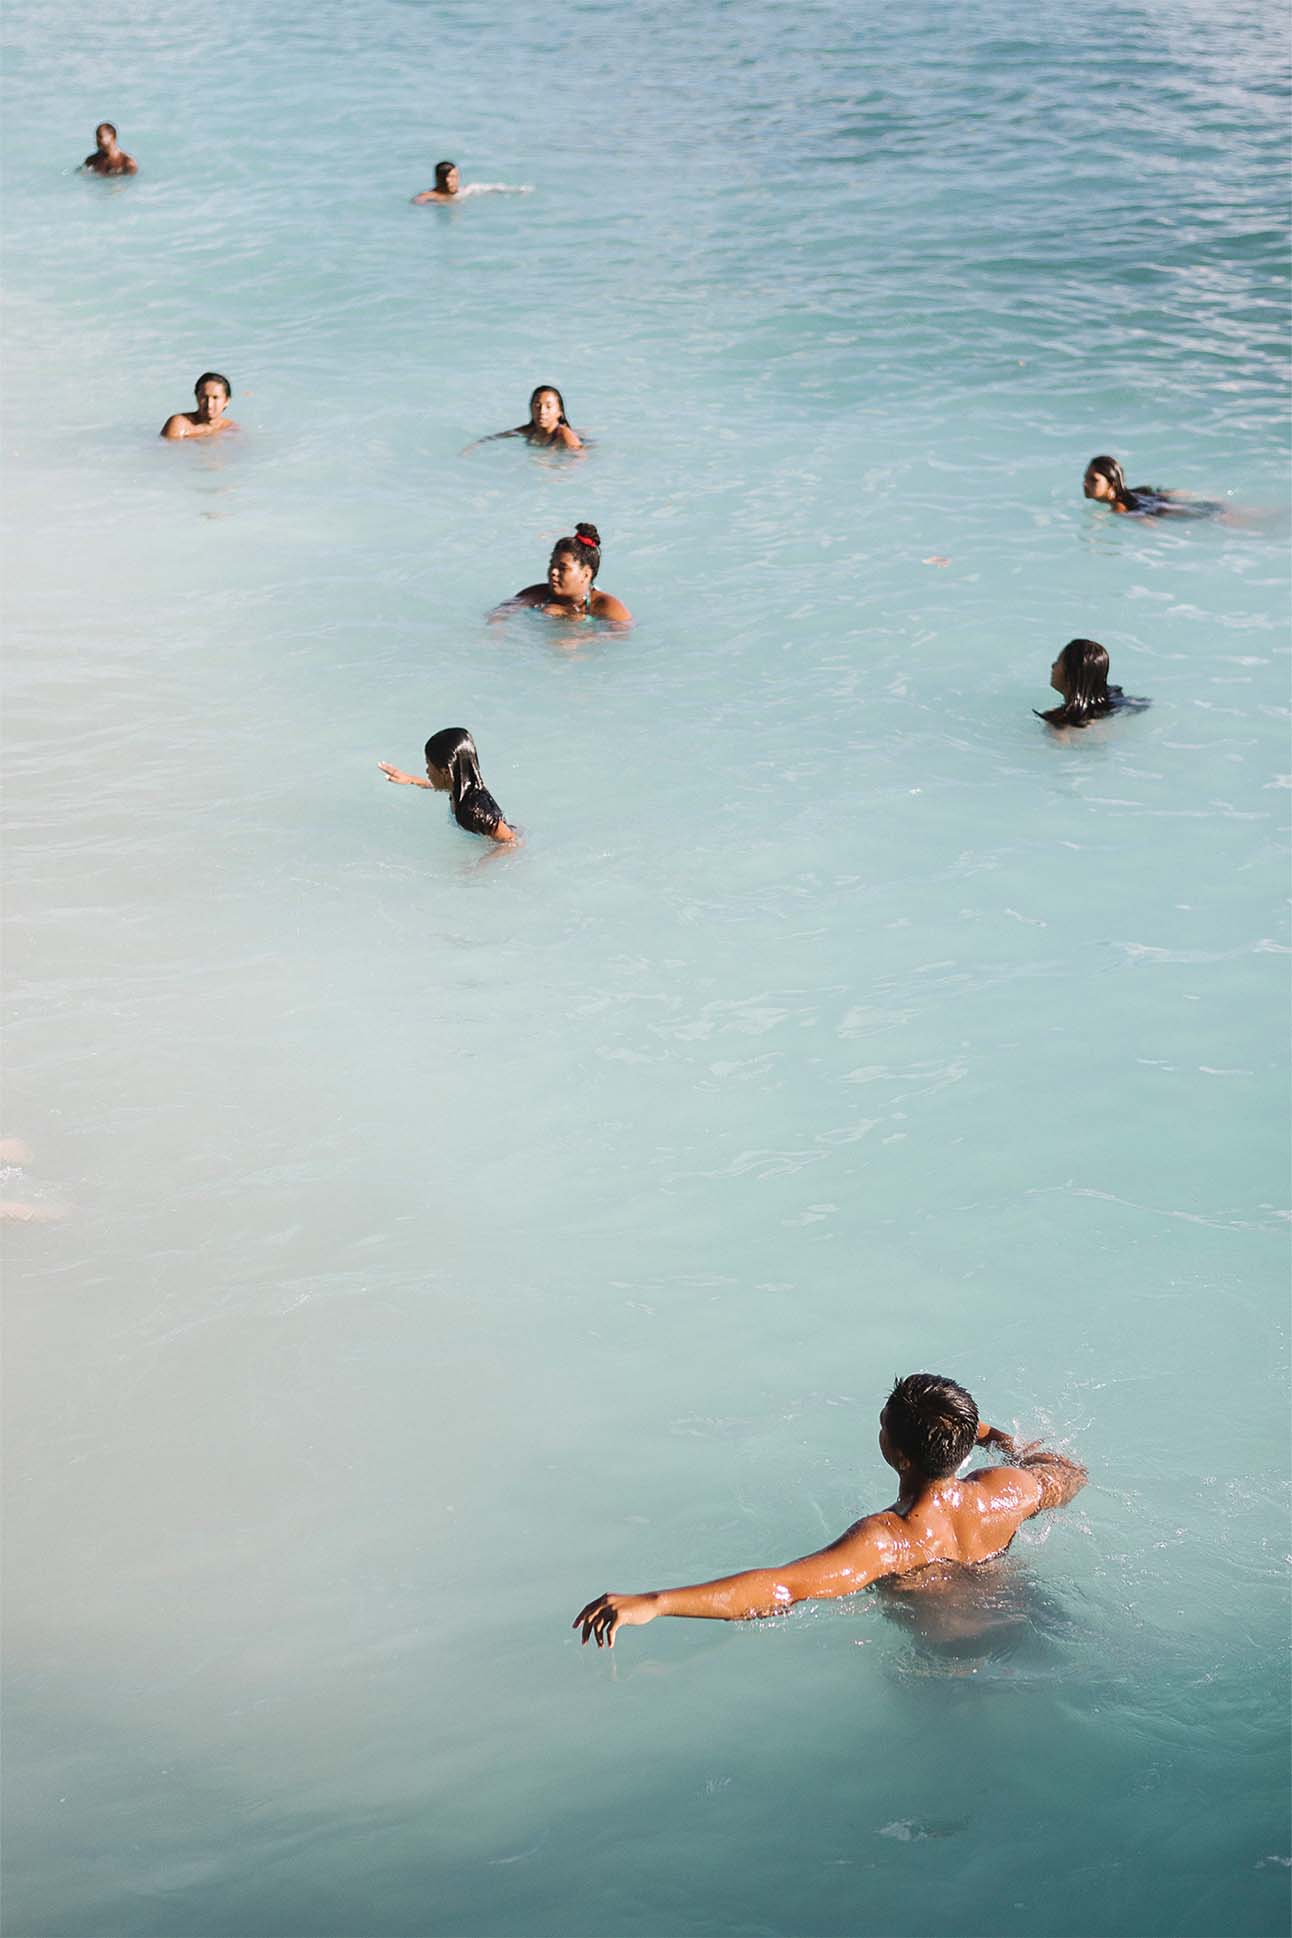 People enjoying a swim in clear turquoise waters, with a view of several individuals floating and swimming peacefully. One person in the foreground is seen swimming with arms outstretched gracefully.